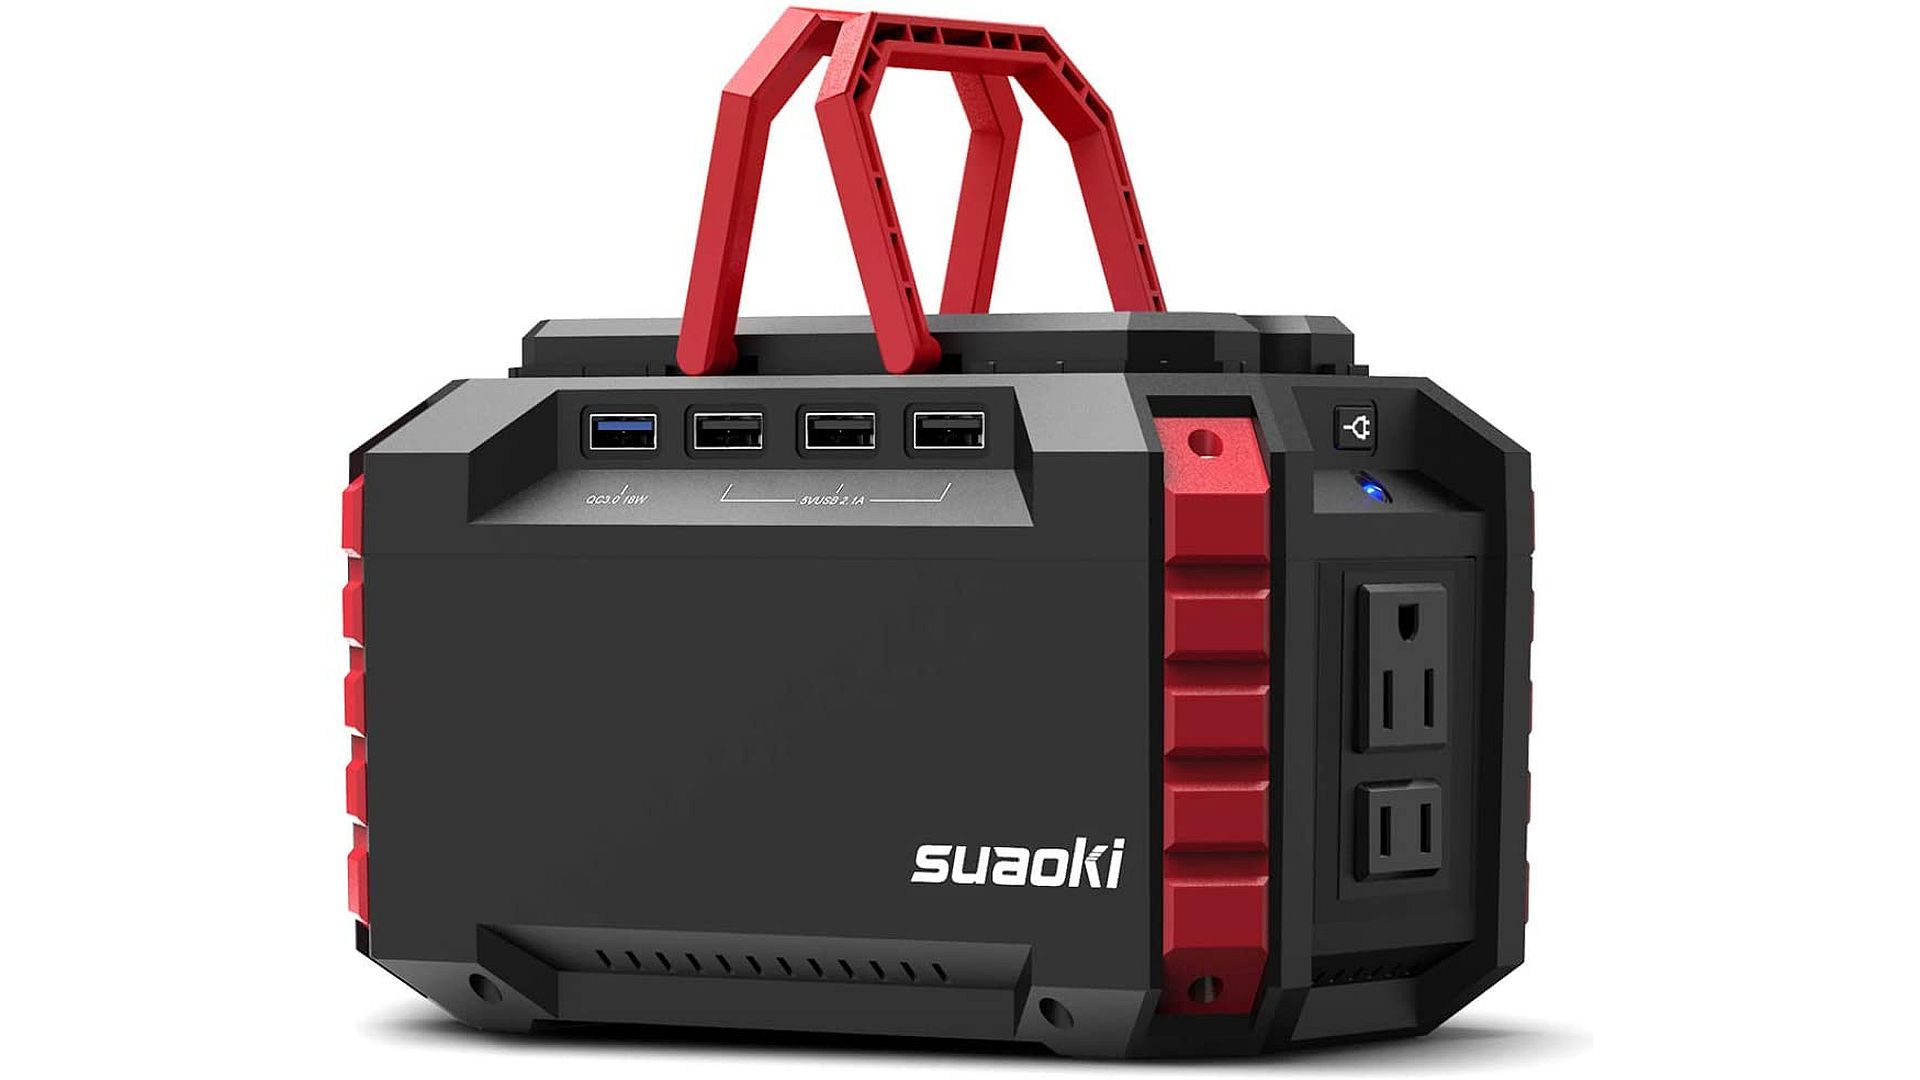 Suaoki S270 Provides Portable Power For Phones And Tablets